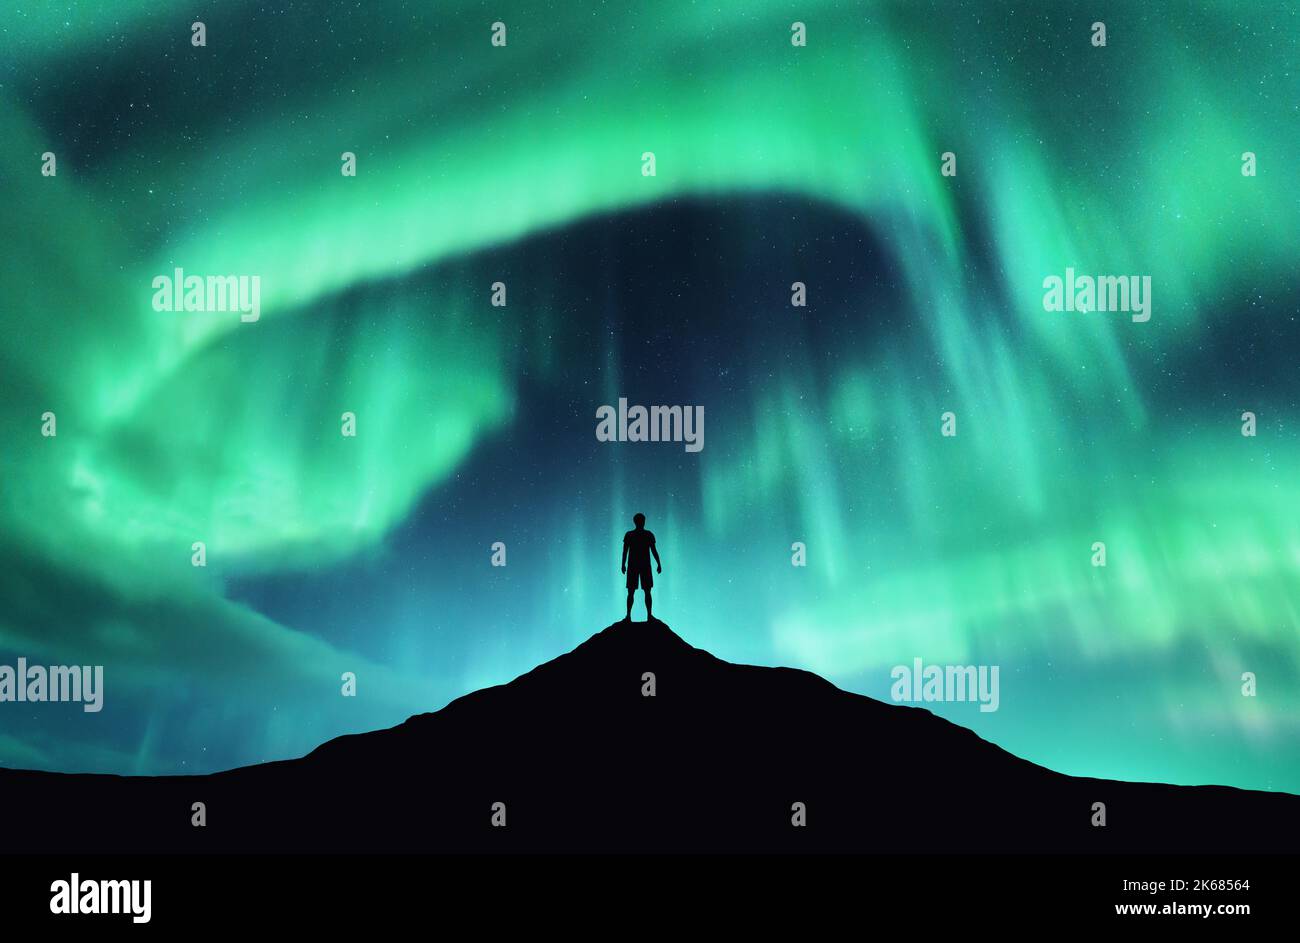 Northern lights and silhouette of standing man on the mountain Stock Photo